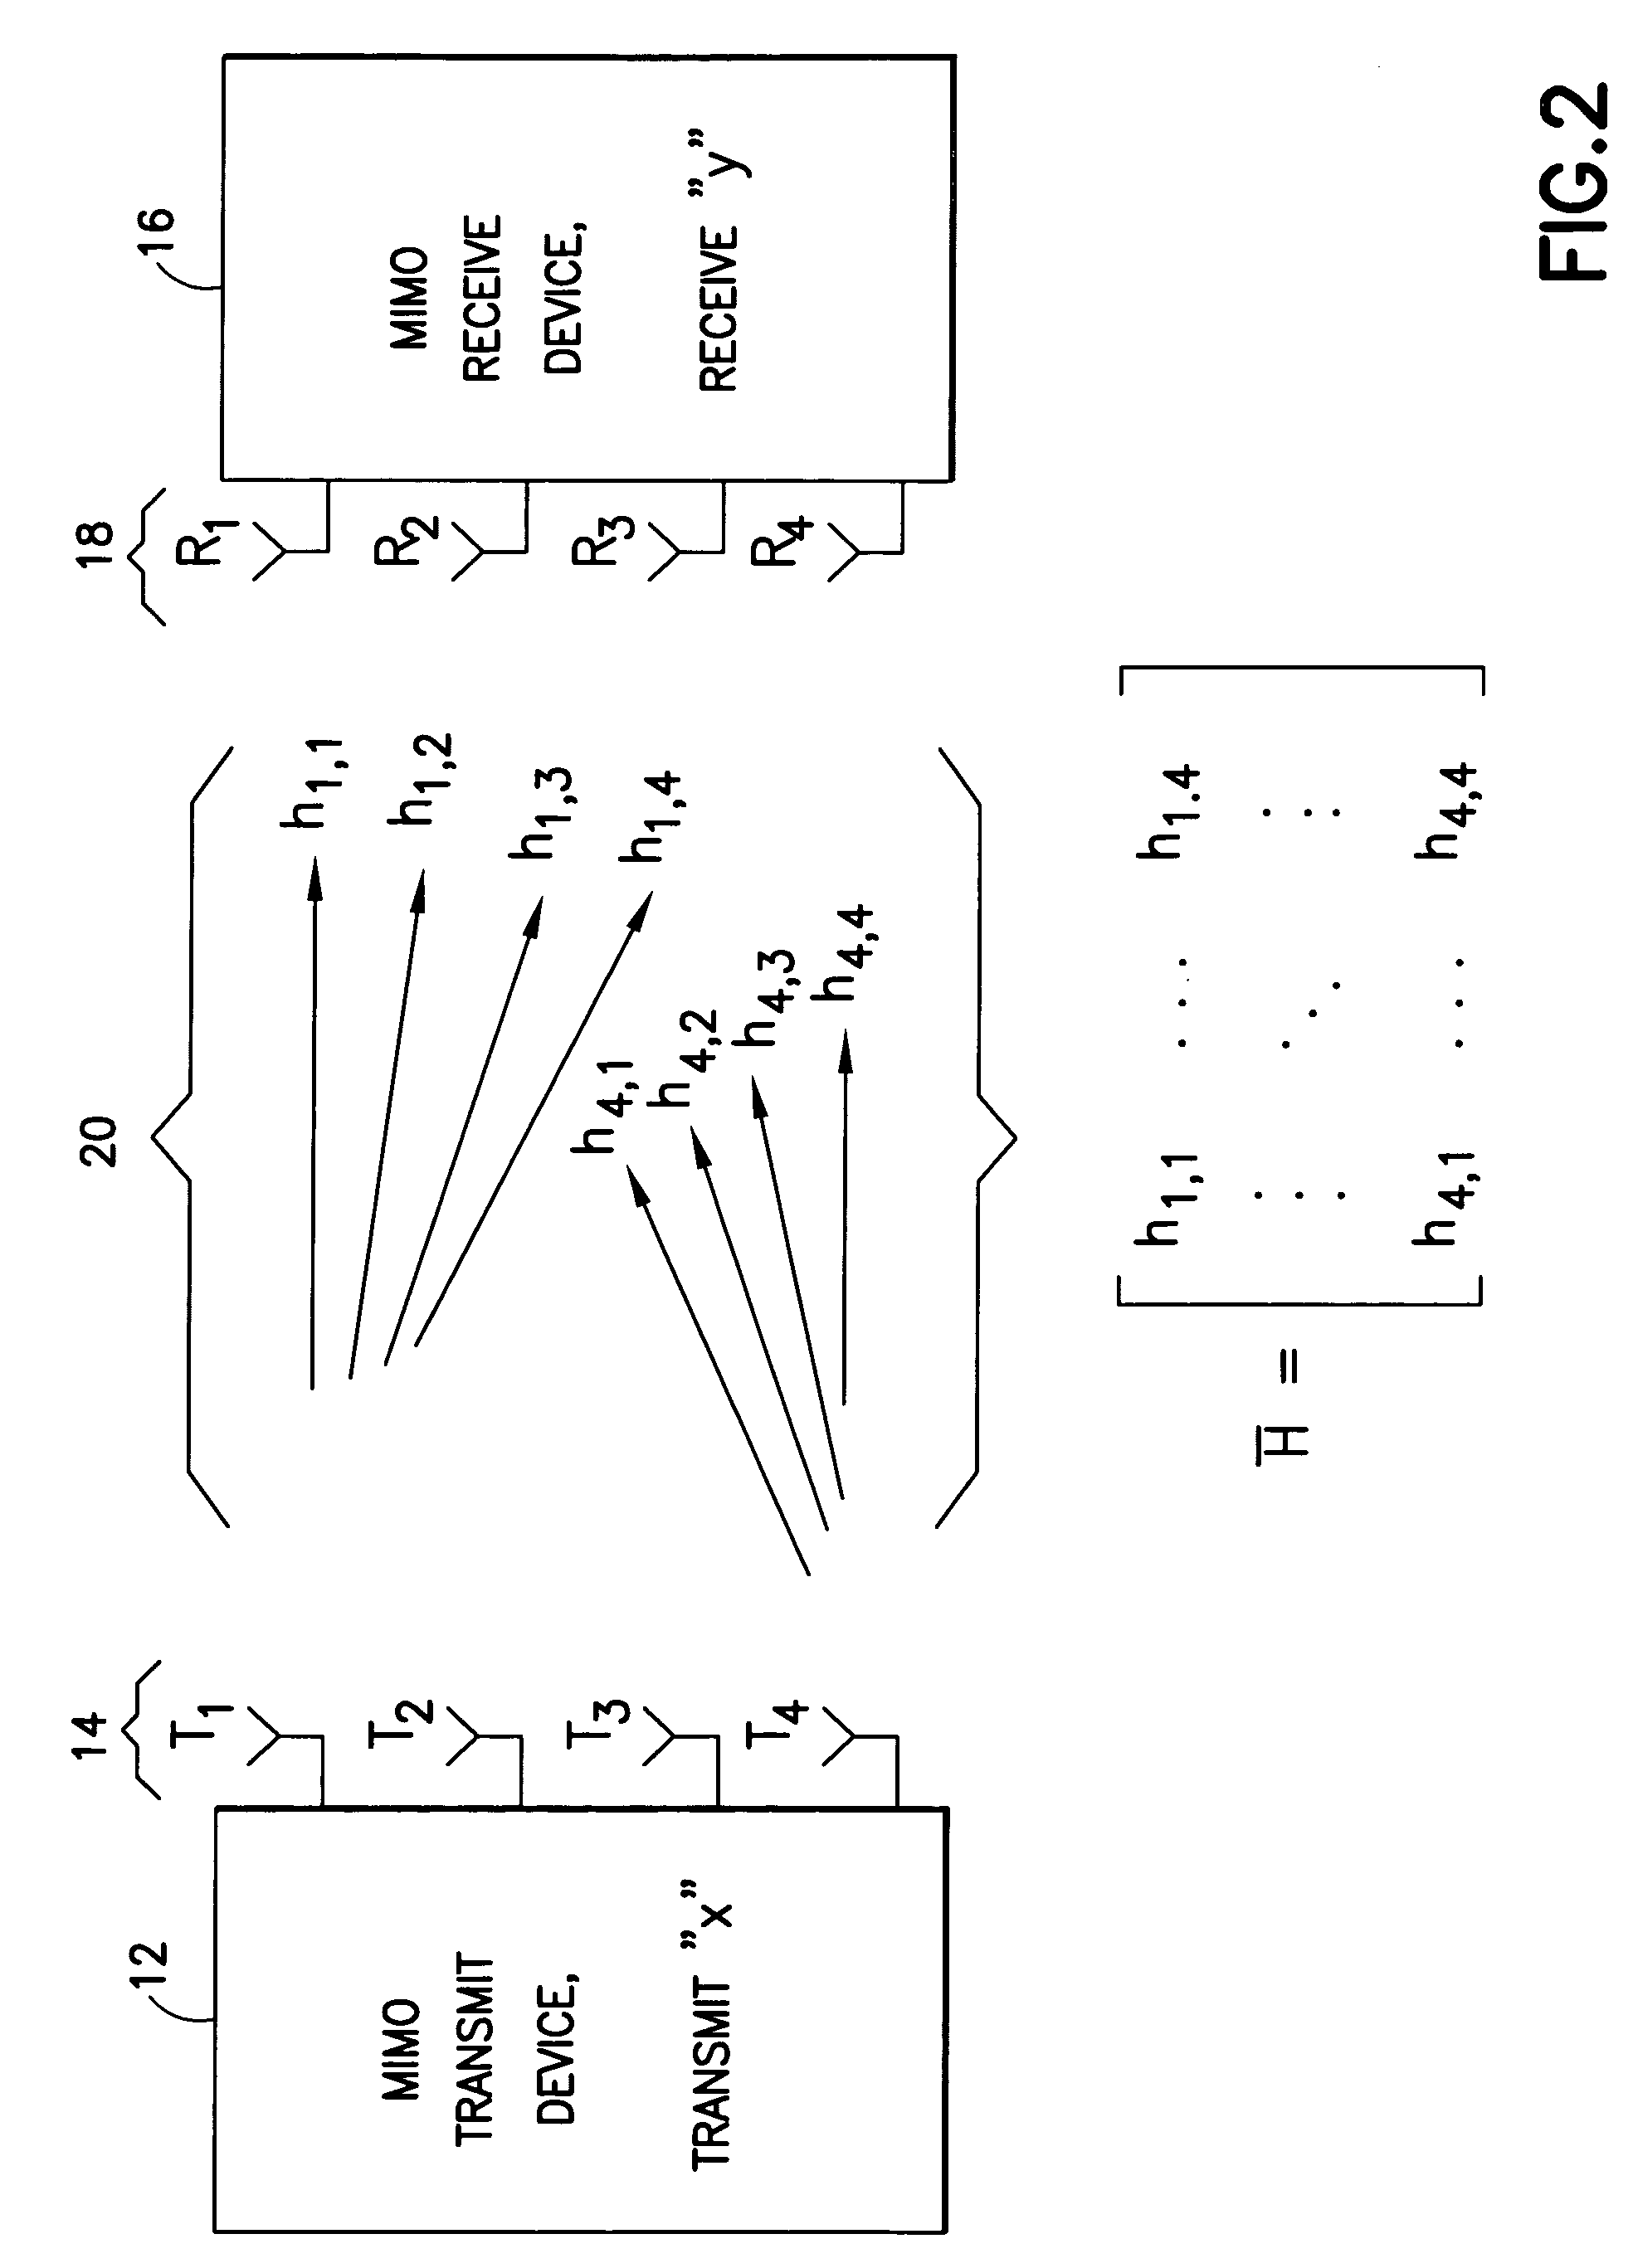 Lower complexity computation of lattice reduction